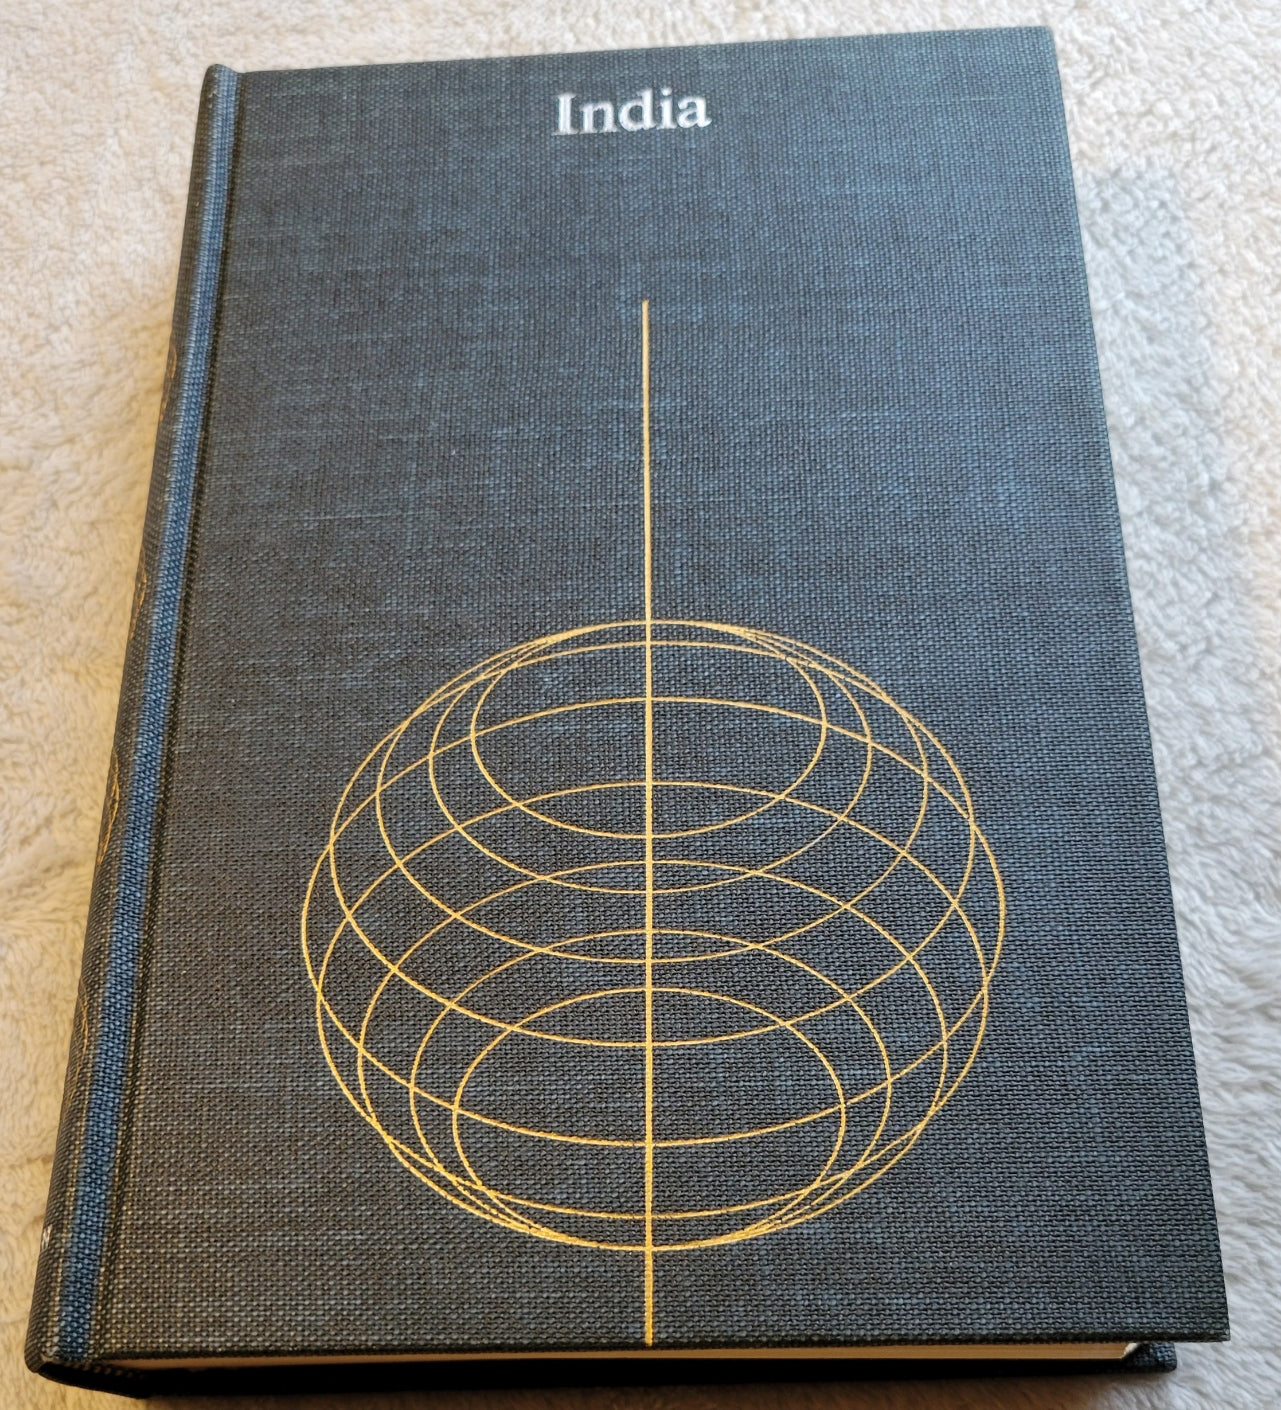 Used book for sale "India: A Modern History" by Percival Spear, published by Ann Arbor: The University of Michigan Press, 1961. This book is a volume in The University of Michigane History of the Modern World. View of front cover.